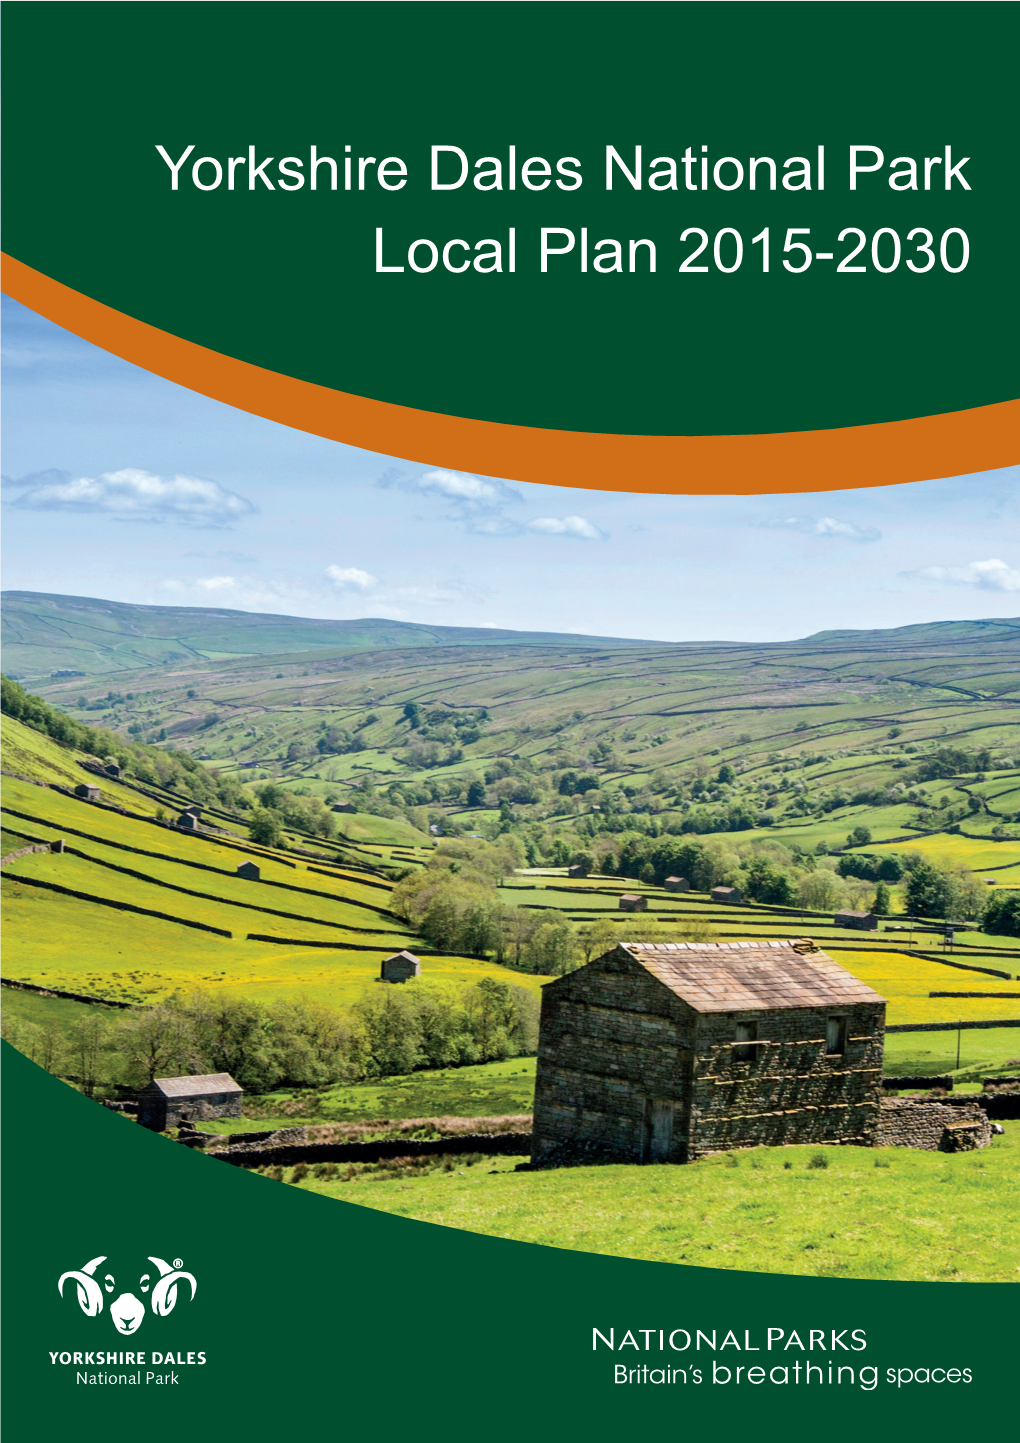 Yorkshire Dales National Park Local Plan 2015-2030 the Local Plan Was Adopted on 20 December 2016